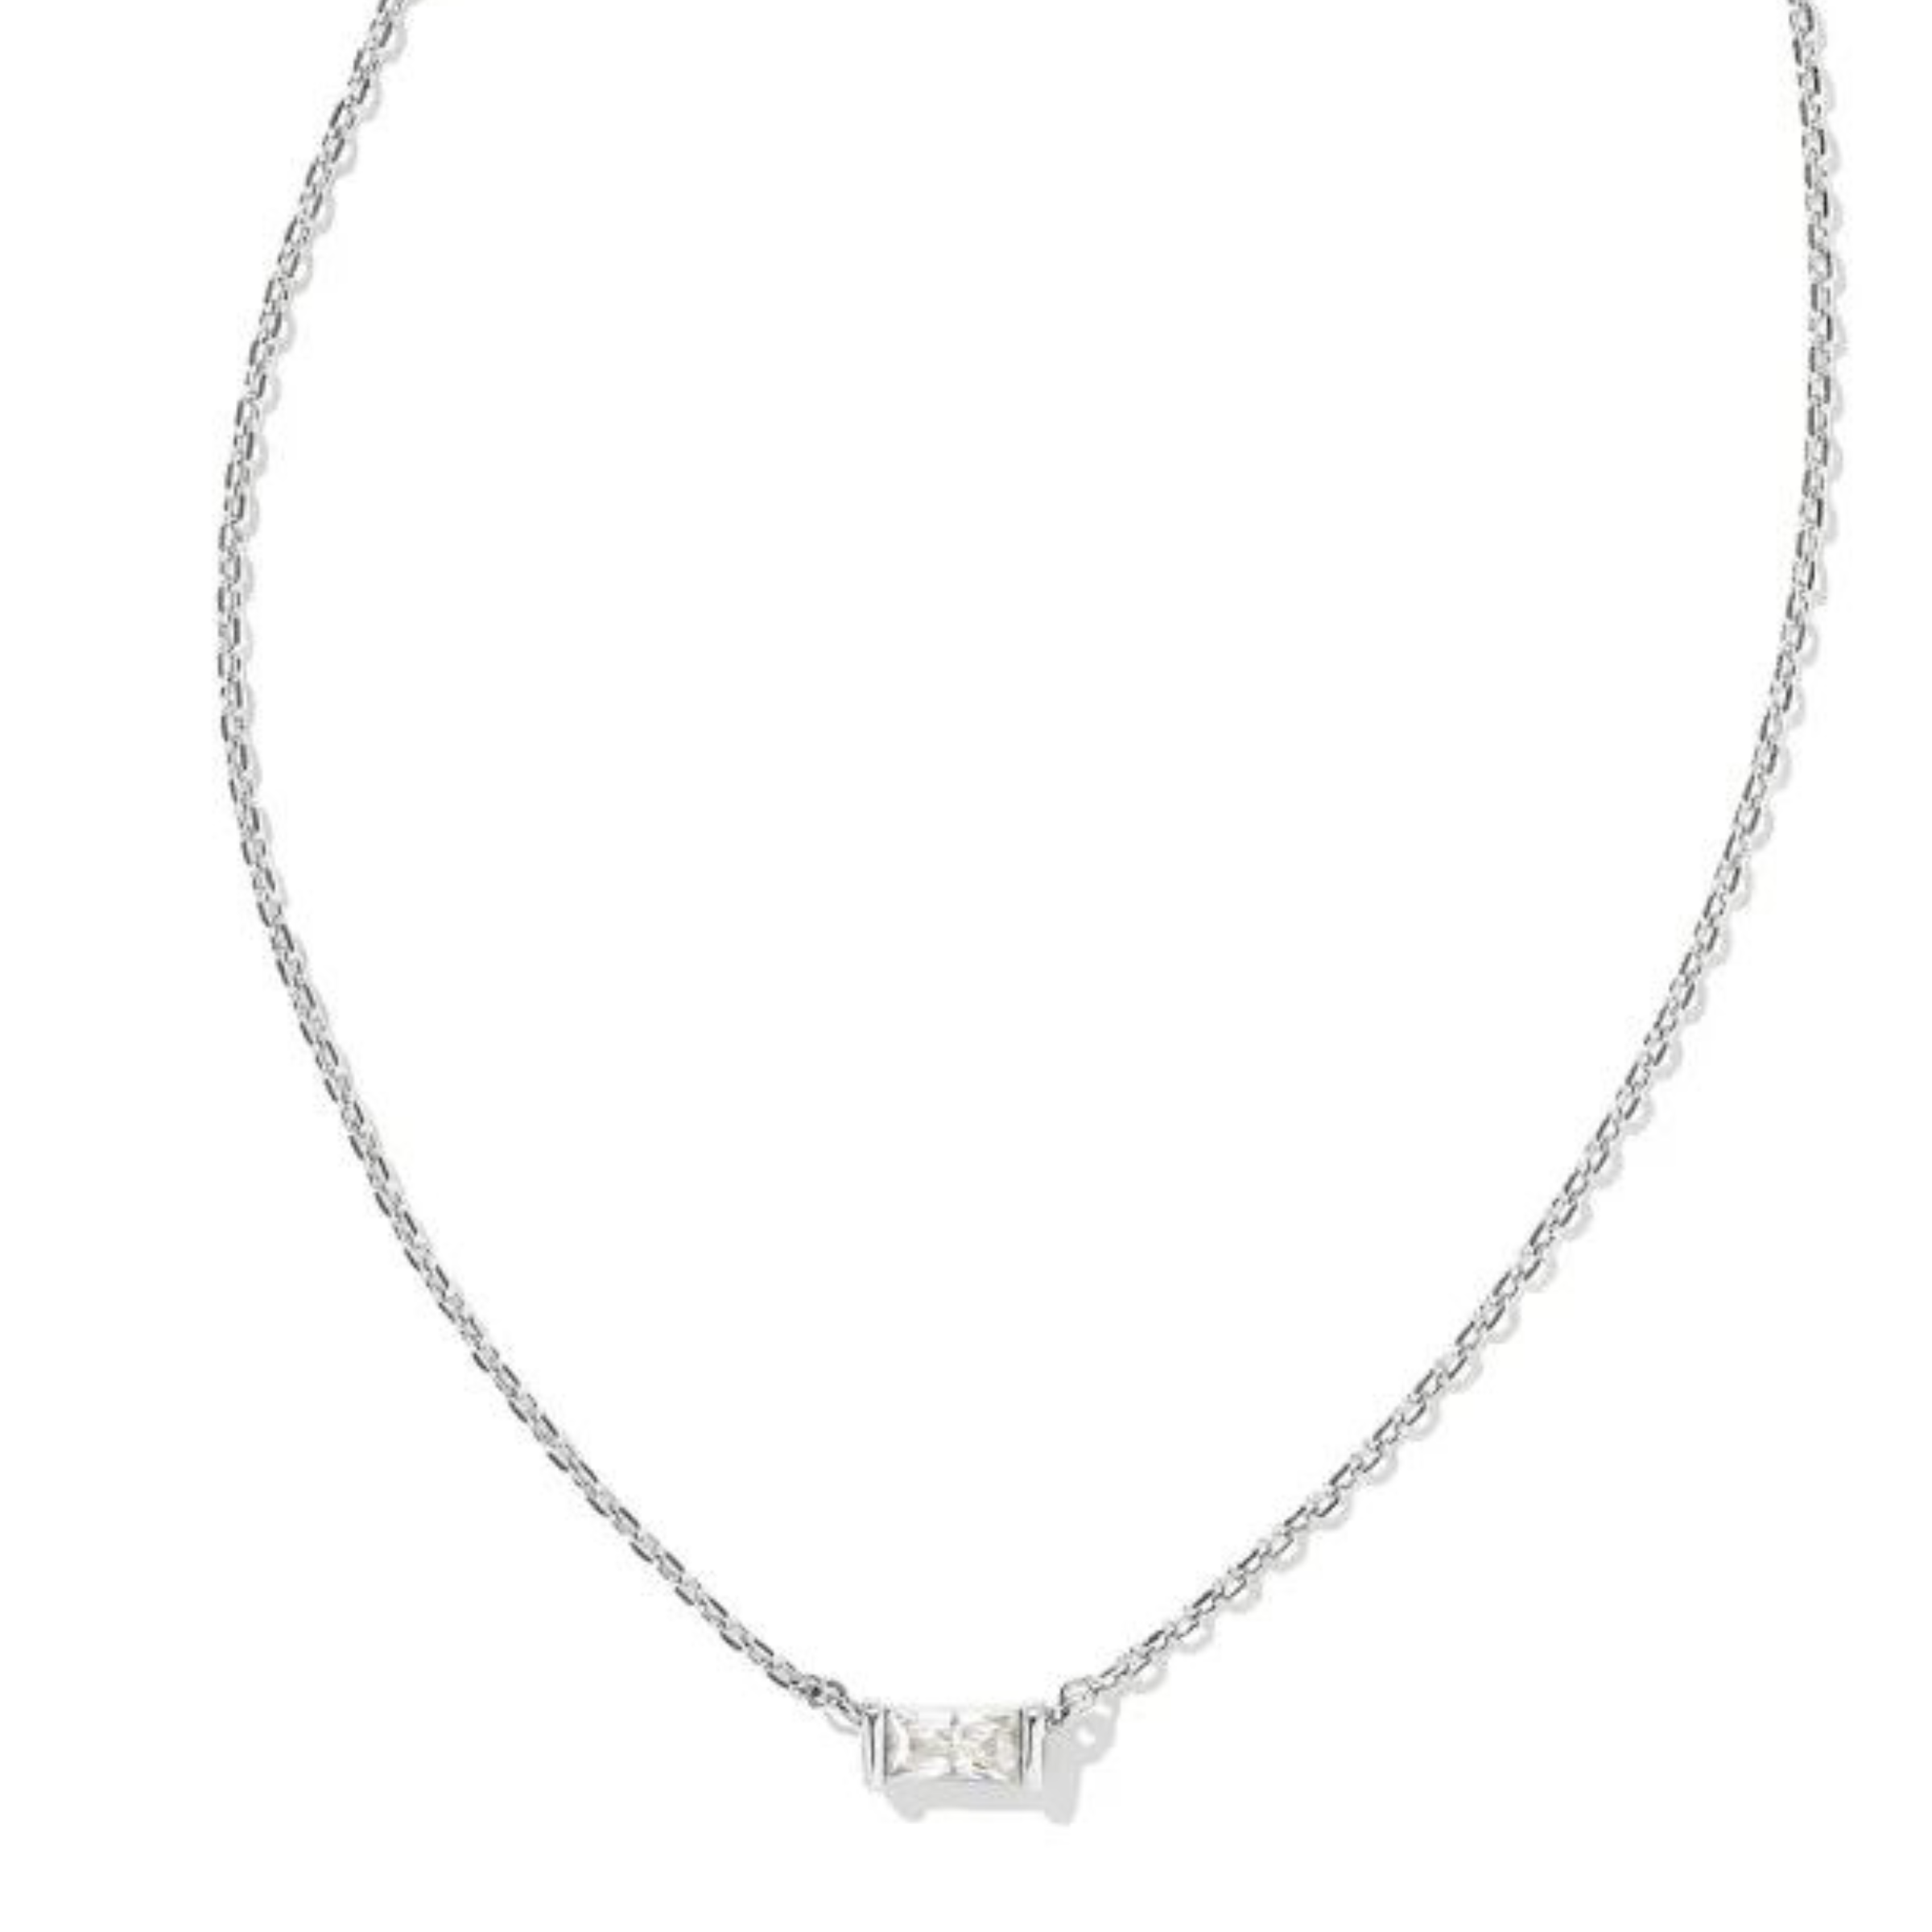 Silver chain necklace with a rectangle, clear crystal pendant. This necklace is pictured on a white background. 